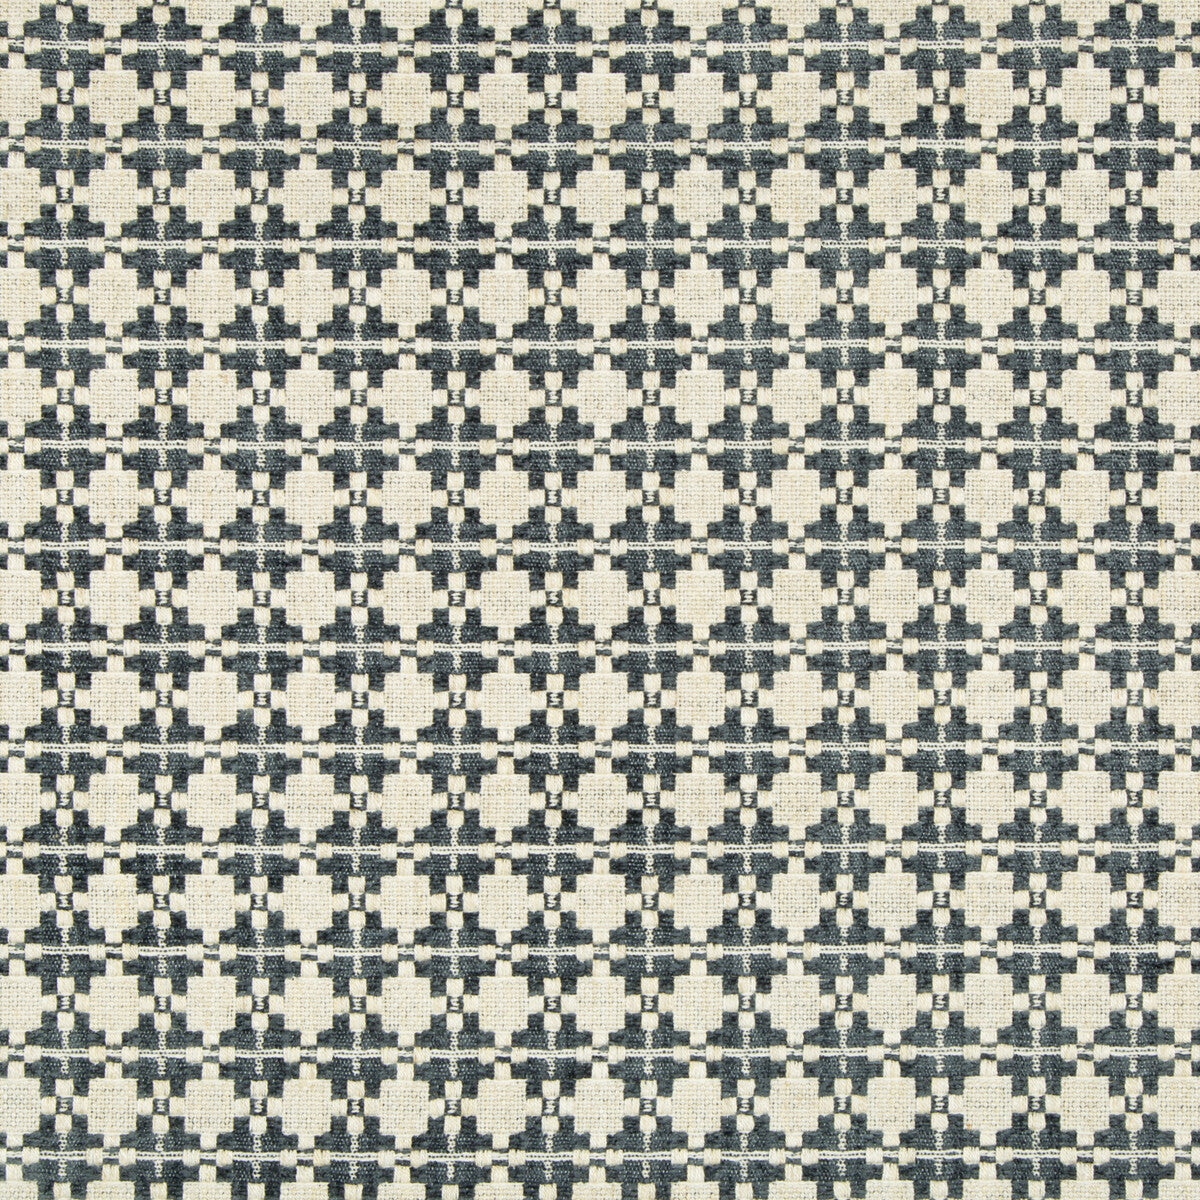 Back In Style fabric in steel color - pattern 34962.516.0 - by Kravet Couture in the Modern Tailor collection